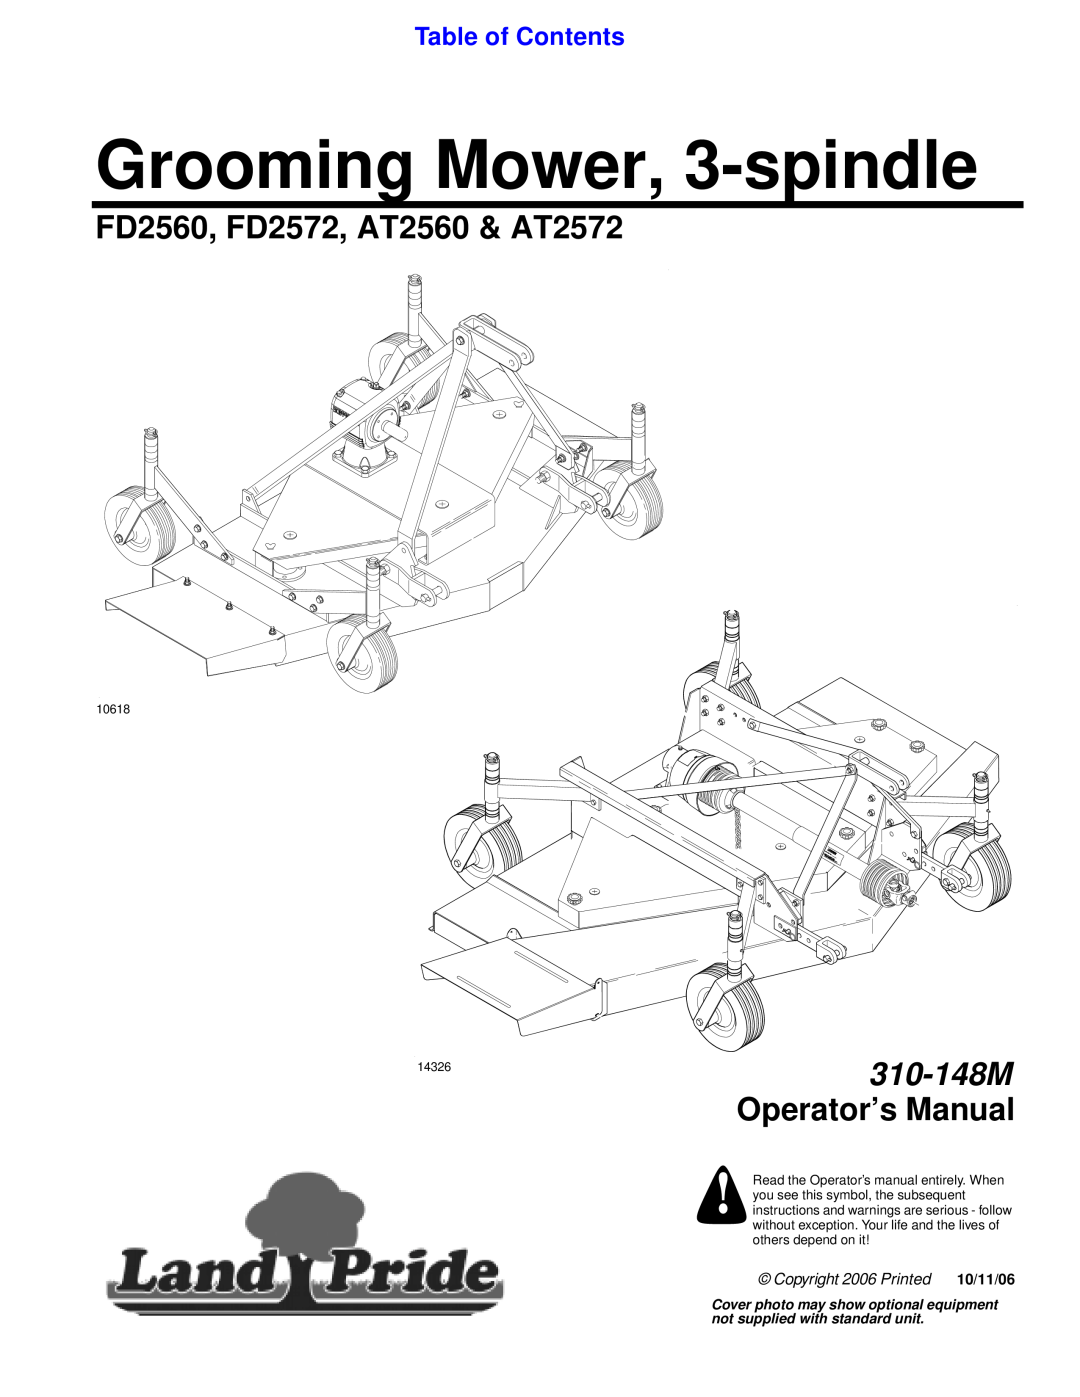 Land Pride manual FD2560, FD2572, AT2560 & AT2572, Operator’s Manual, Table of Contents, Grooming Mower, 3-spindle 